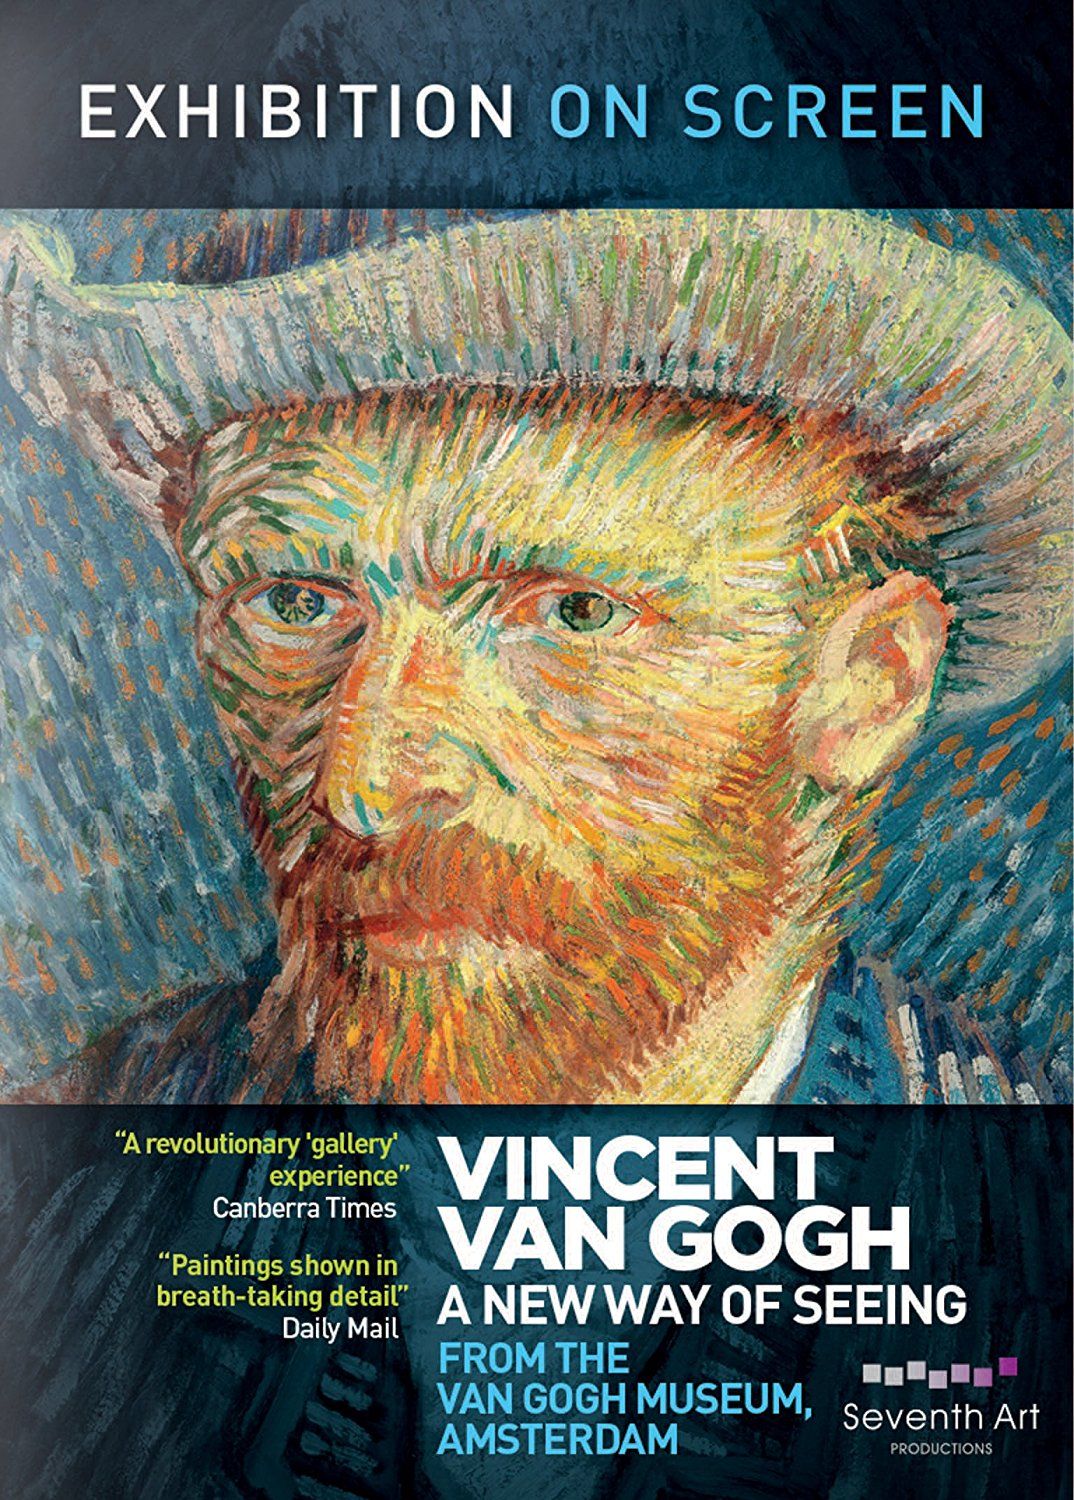 VINCENT VAN GOGH: A NEW WAY OF SEEING (ENCORE) EXHIBITION ON SCREEN